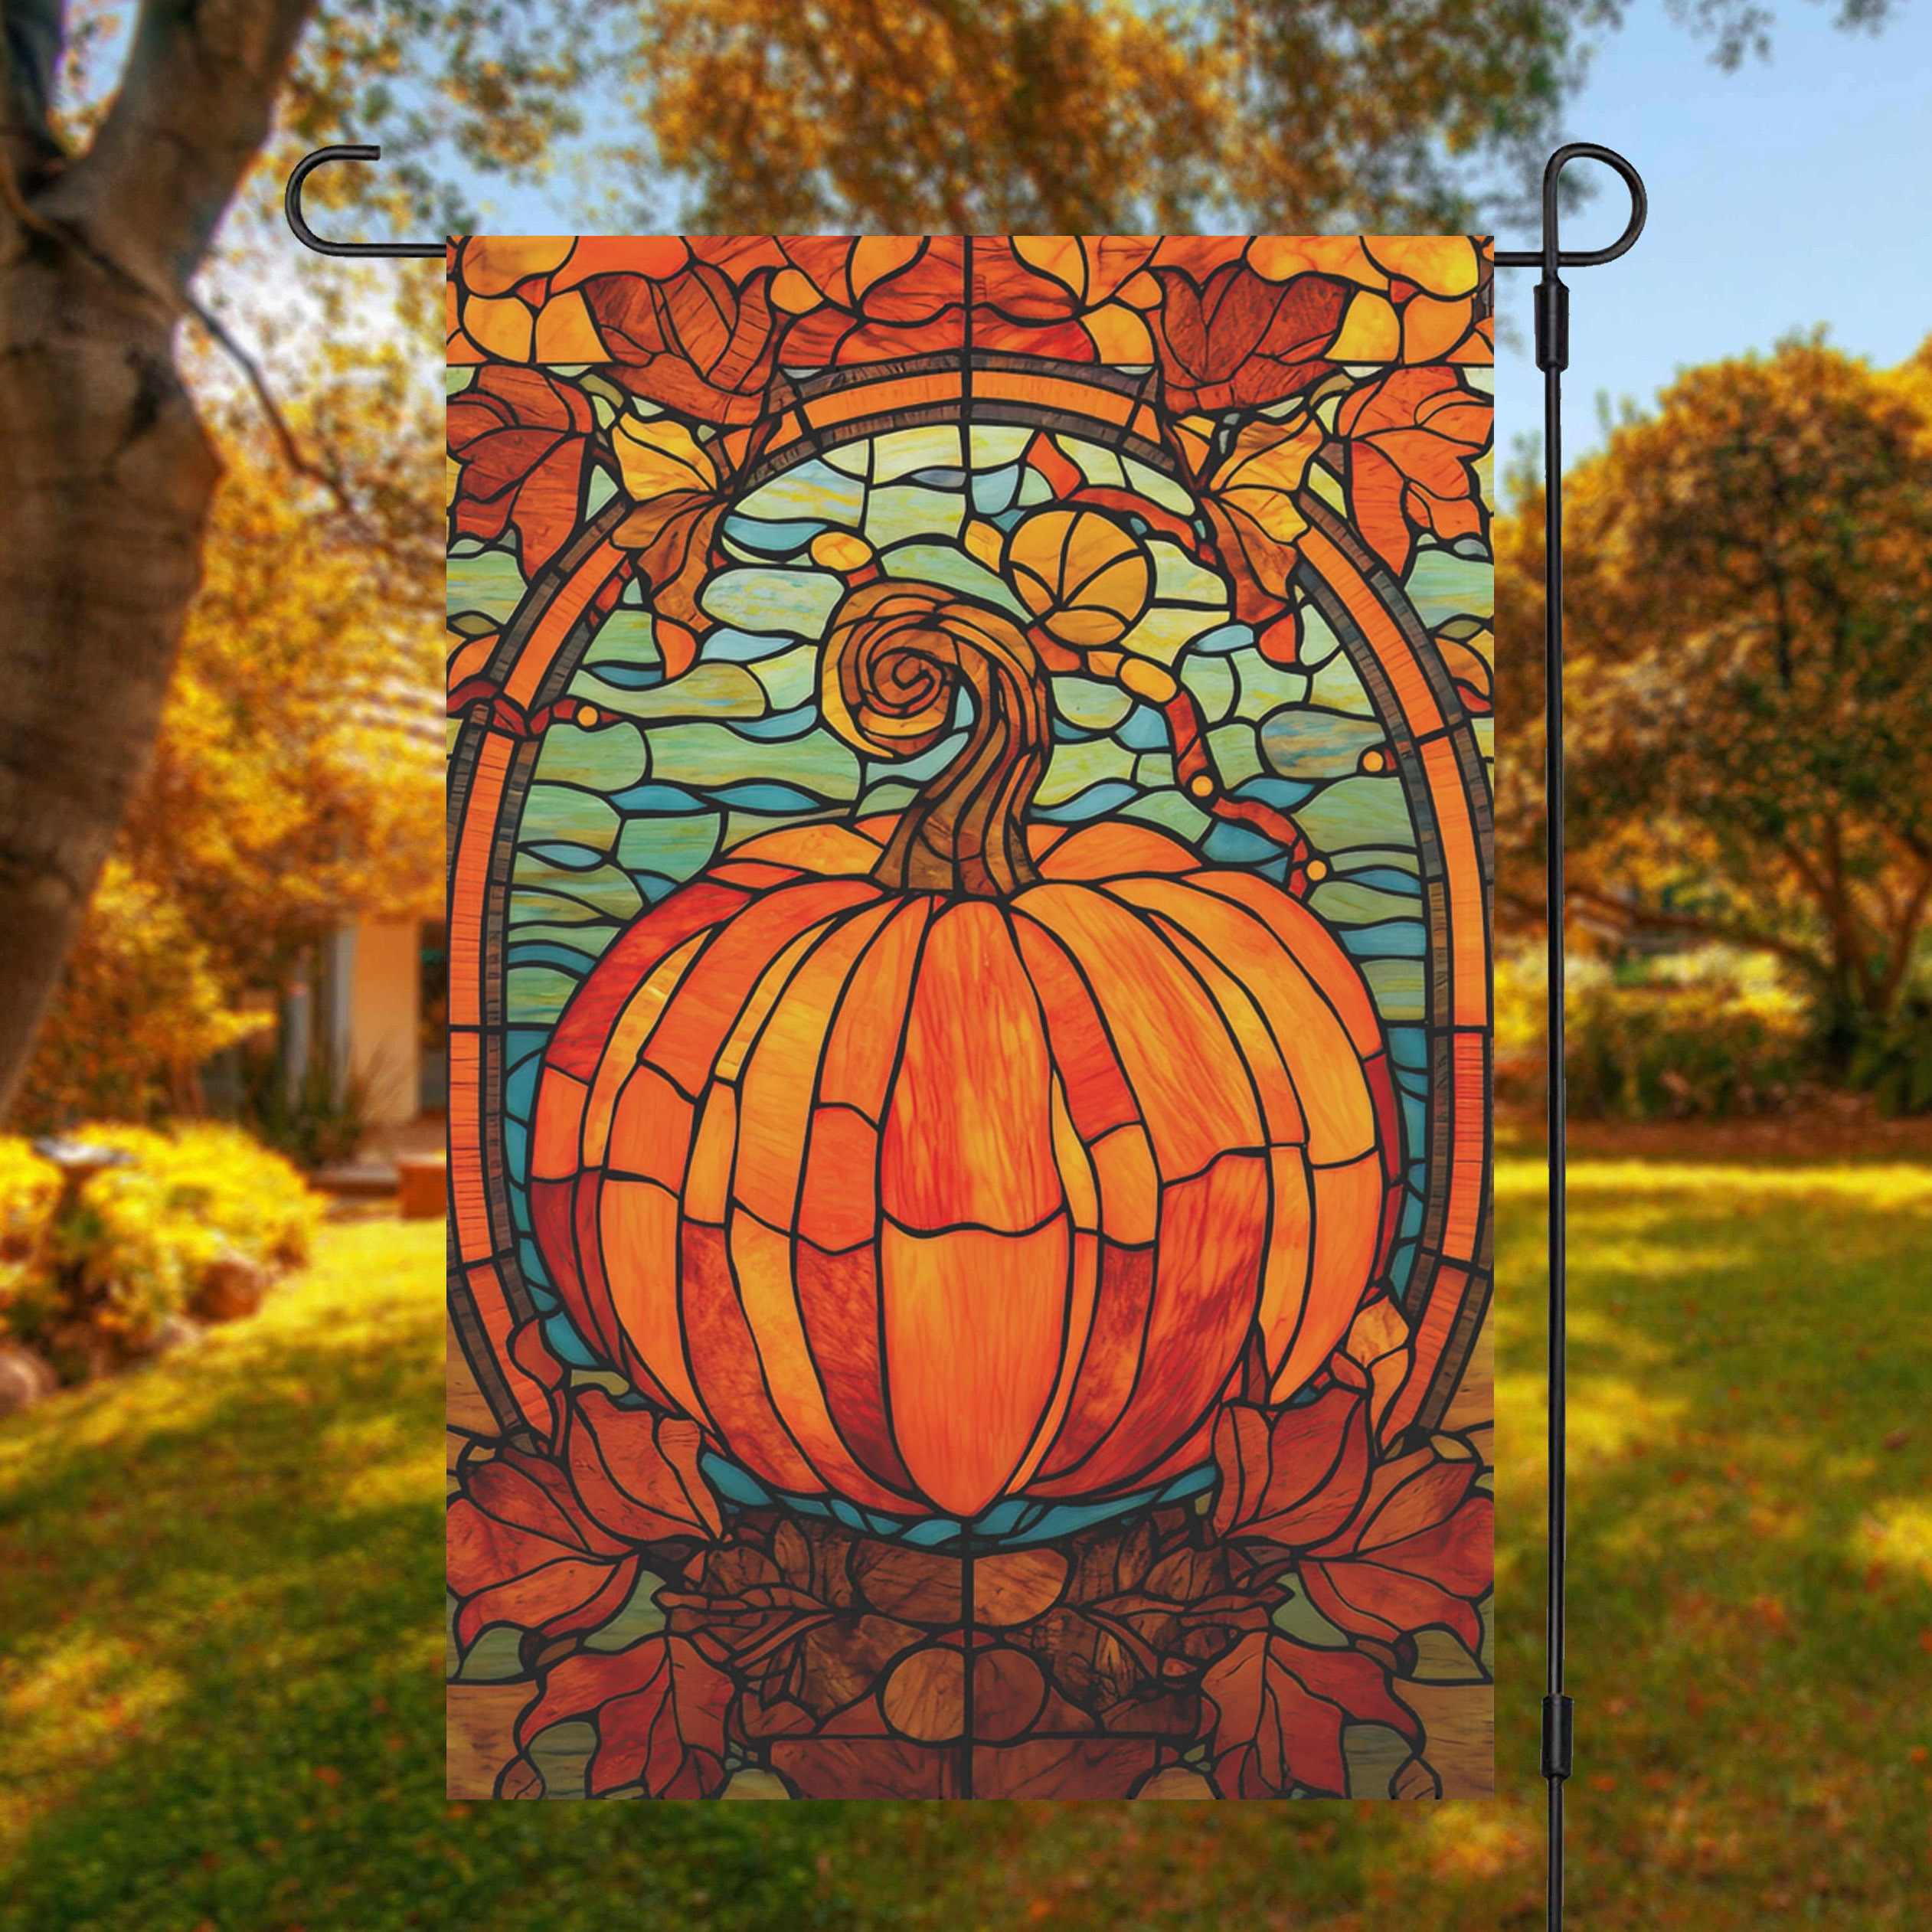 

Jit Fall Pumpkin Harvest Double-sided Garden Flag - Polyester Stain Glass Style Autumn Yard Flag, Multipurpose Outdoor Home Decor, Weather-resistant, 12x18in - No Flagpole Included